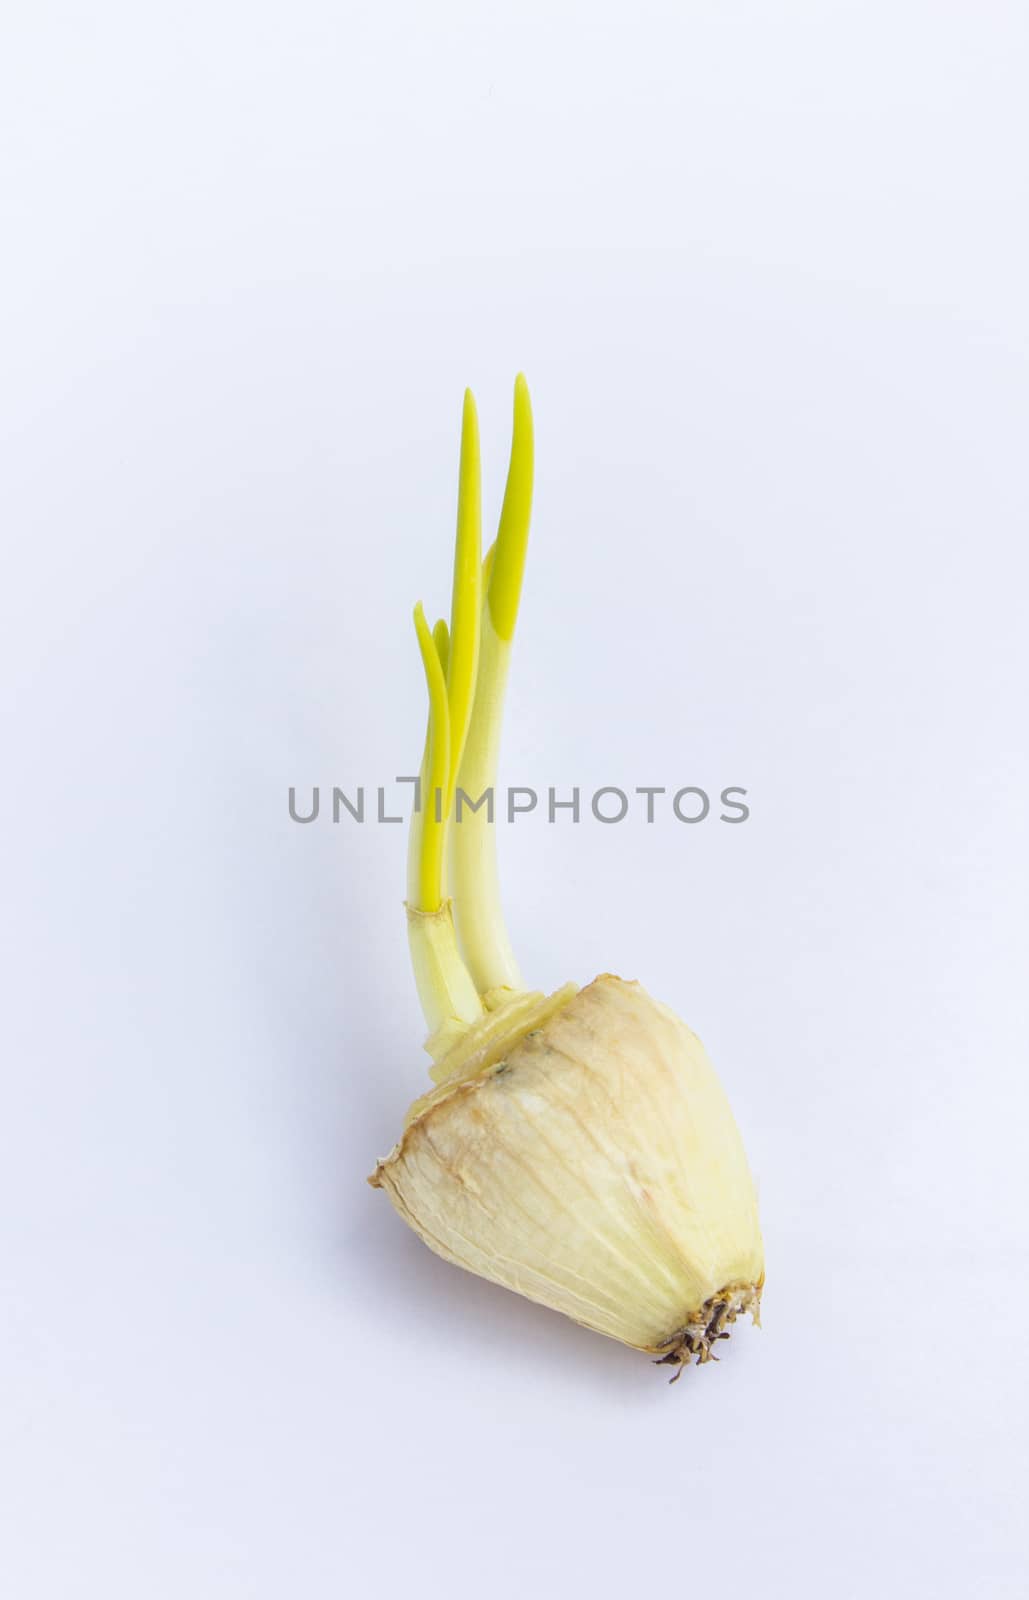 The big head onion by PCharnnarong